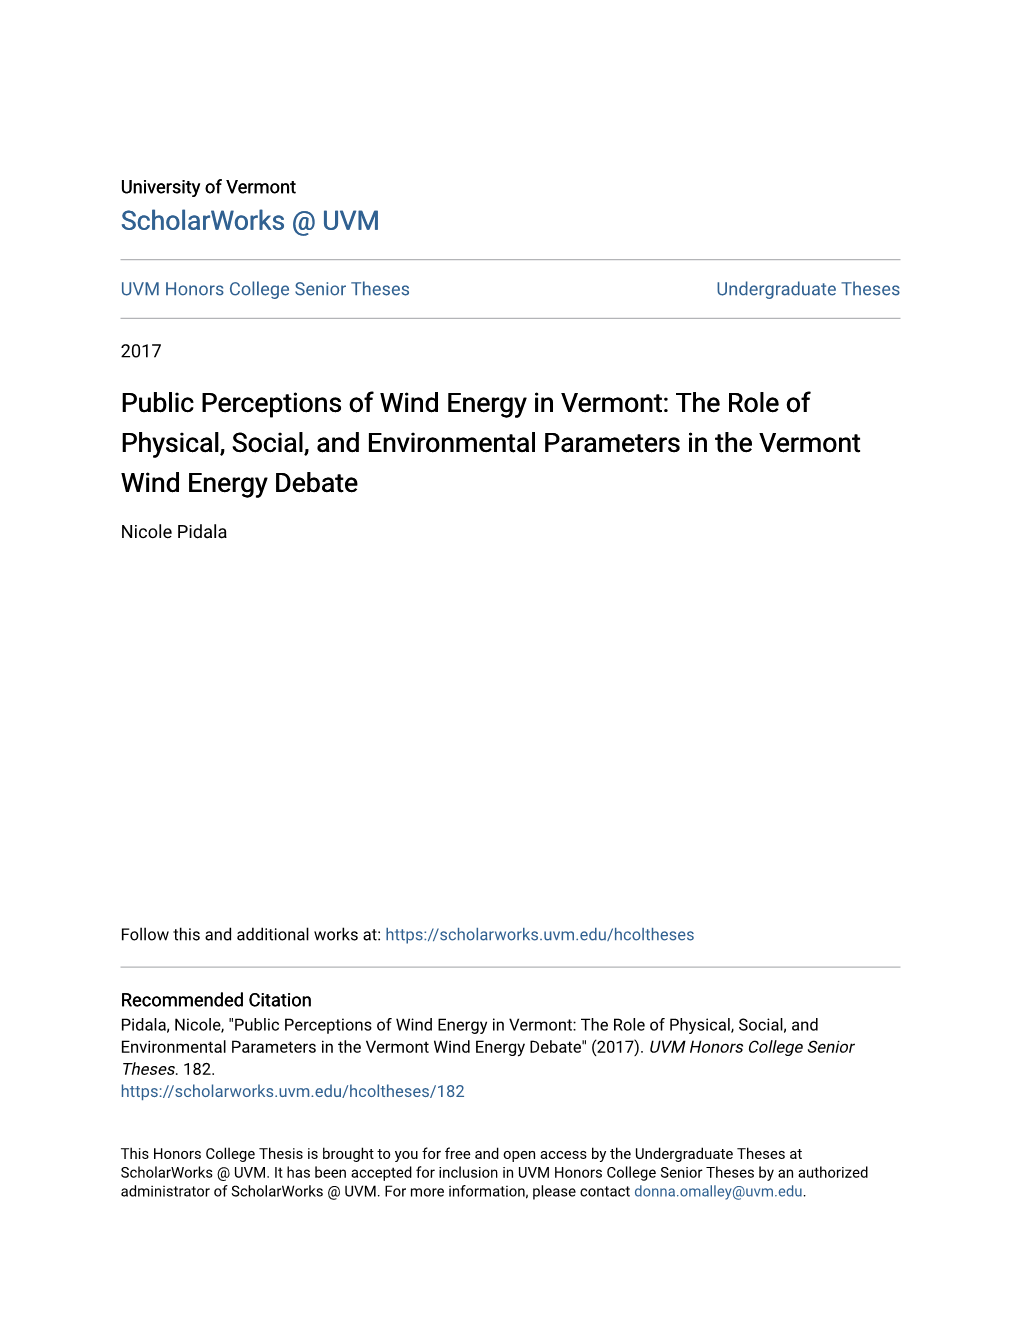 Public Perceptions of Wind Energy in Vermont: the Role of Physical, Social, and Environmental Parameters in the Vermont Wind Energy Debate